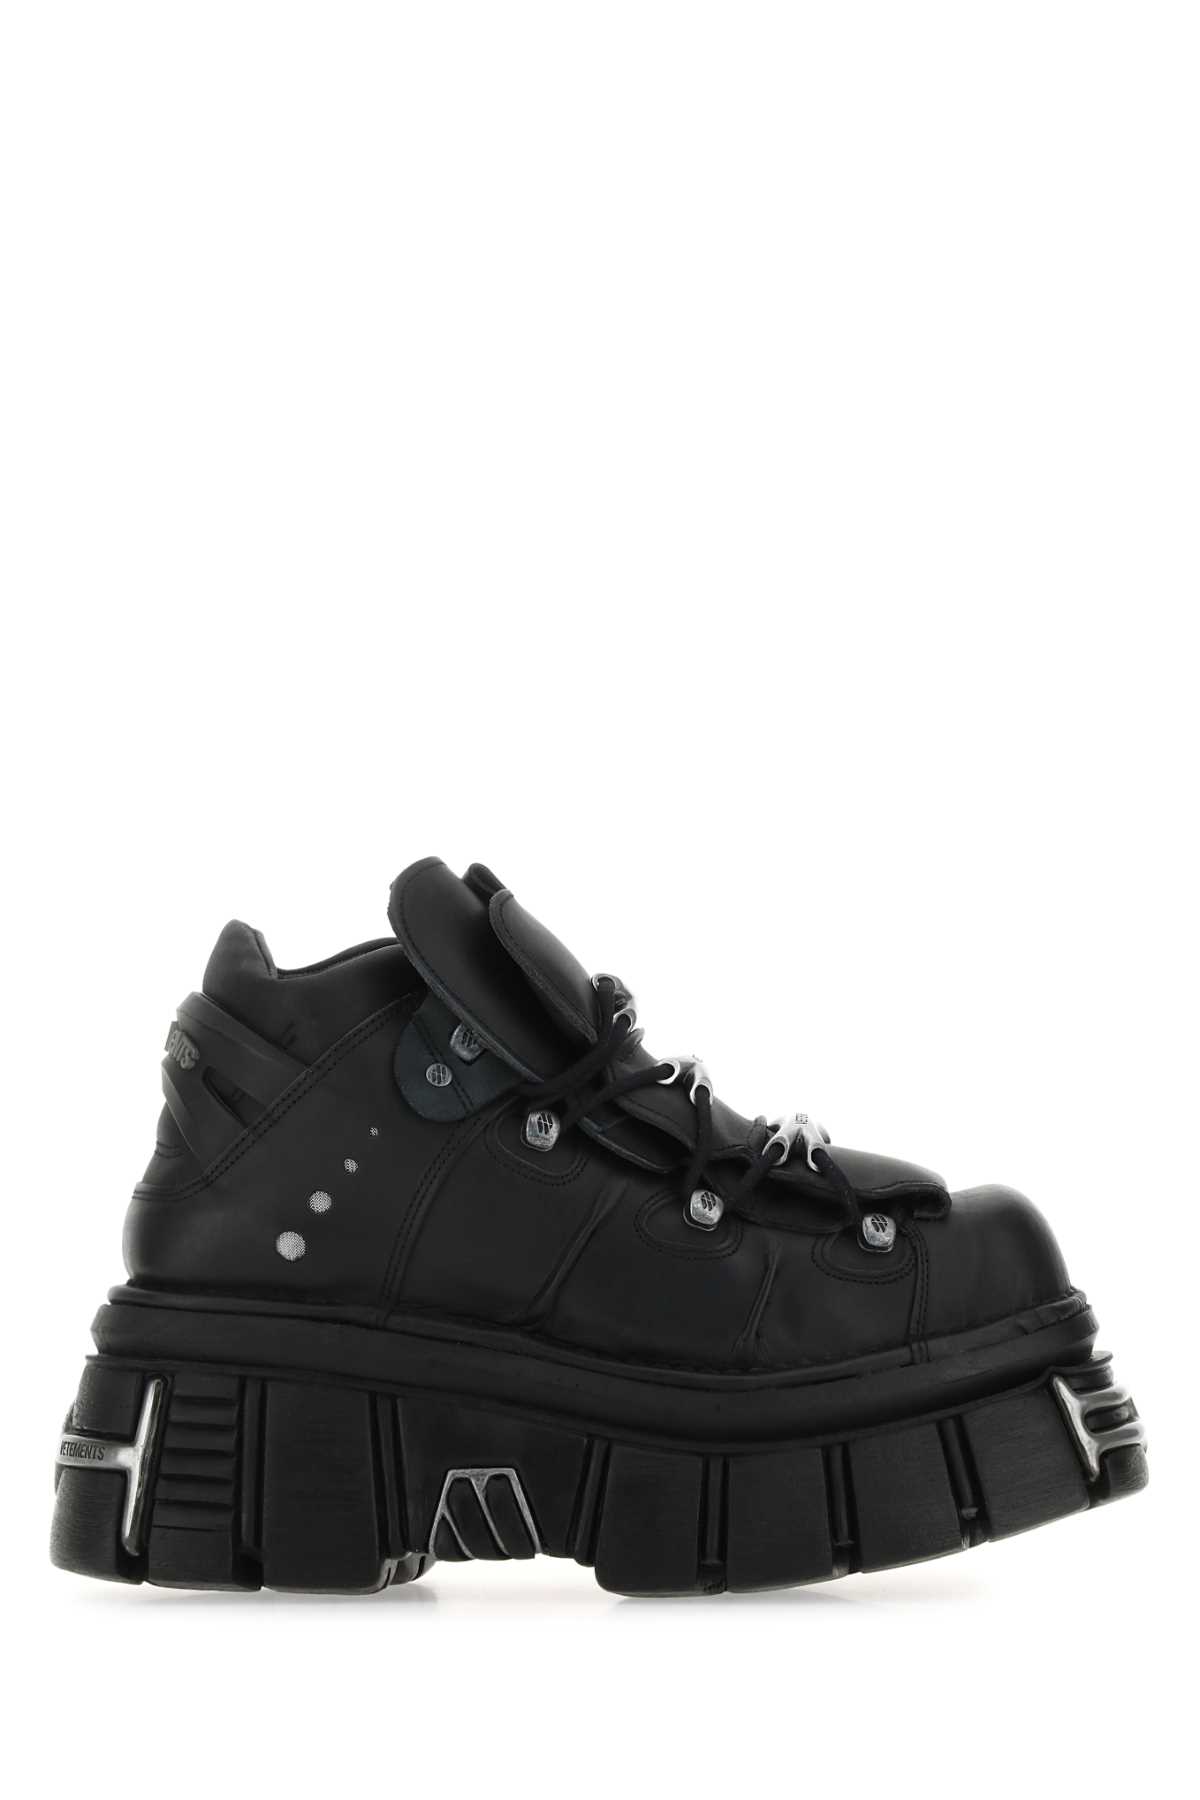 Vetements Black Leather New Rock Sneakers In White